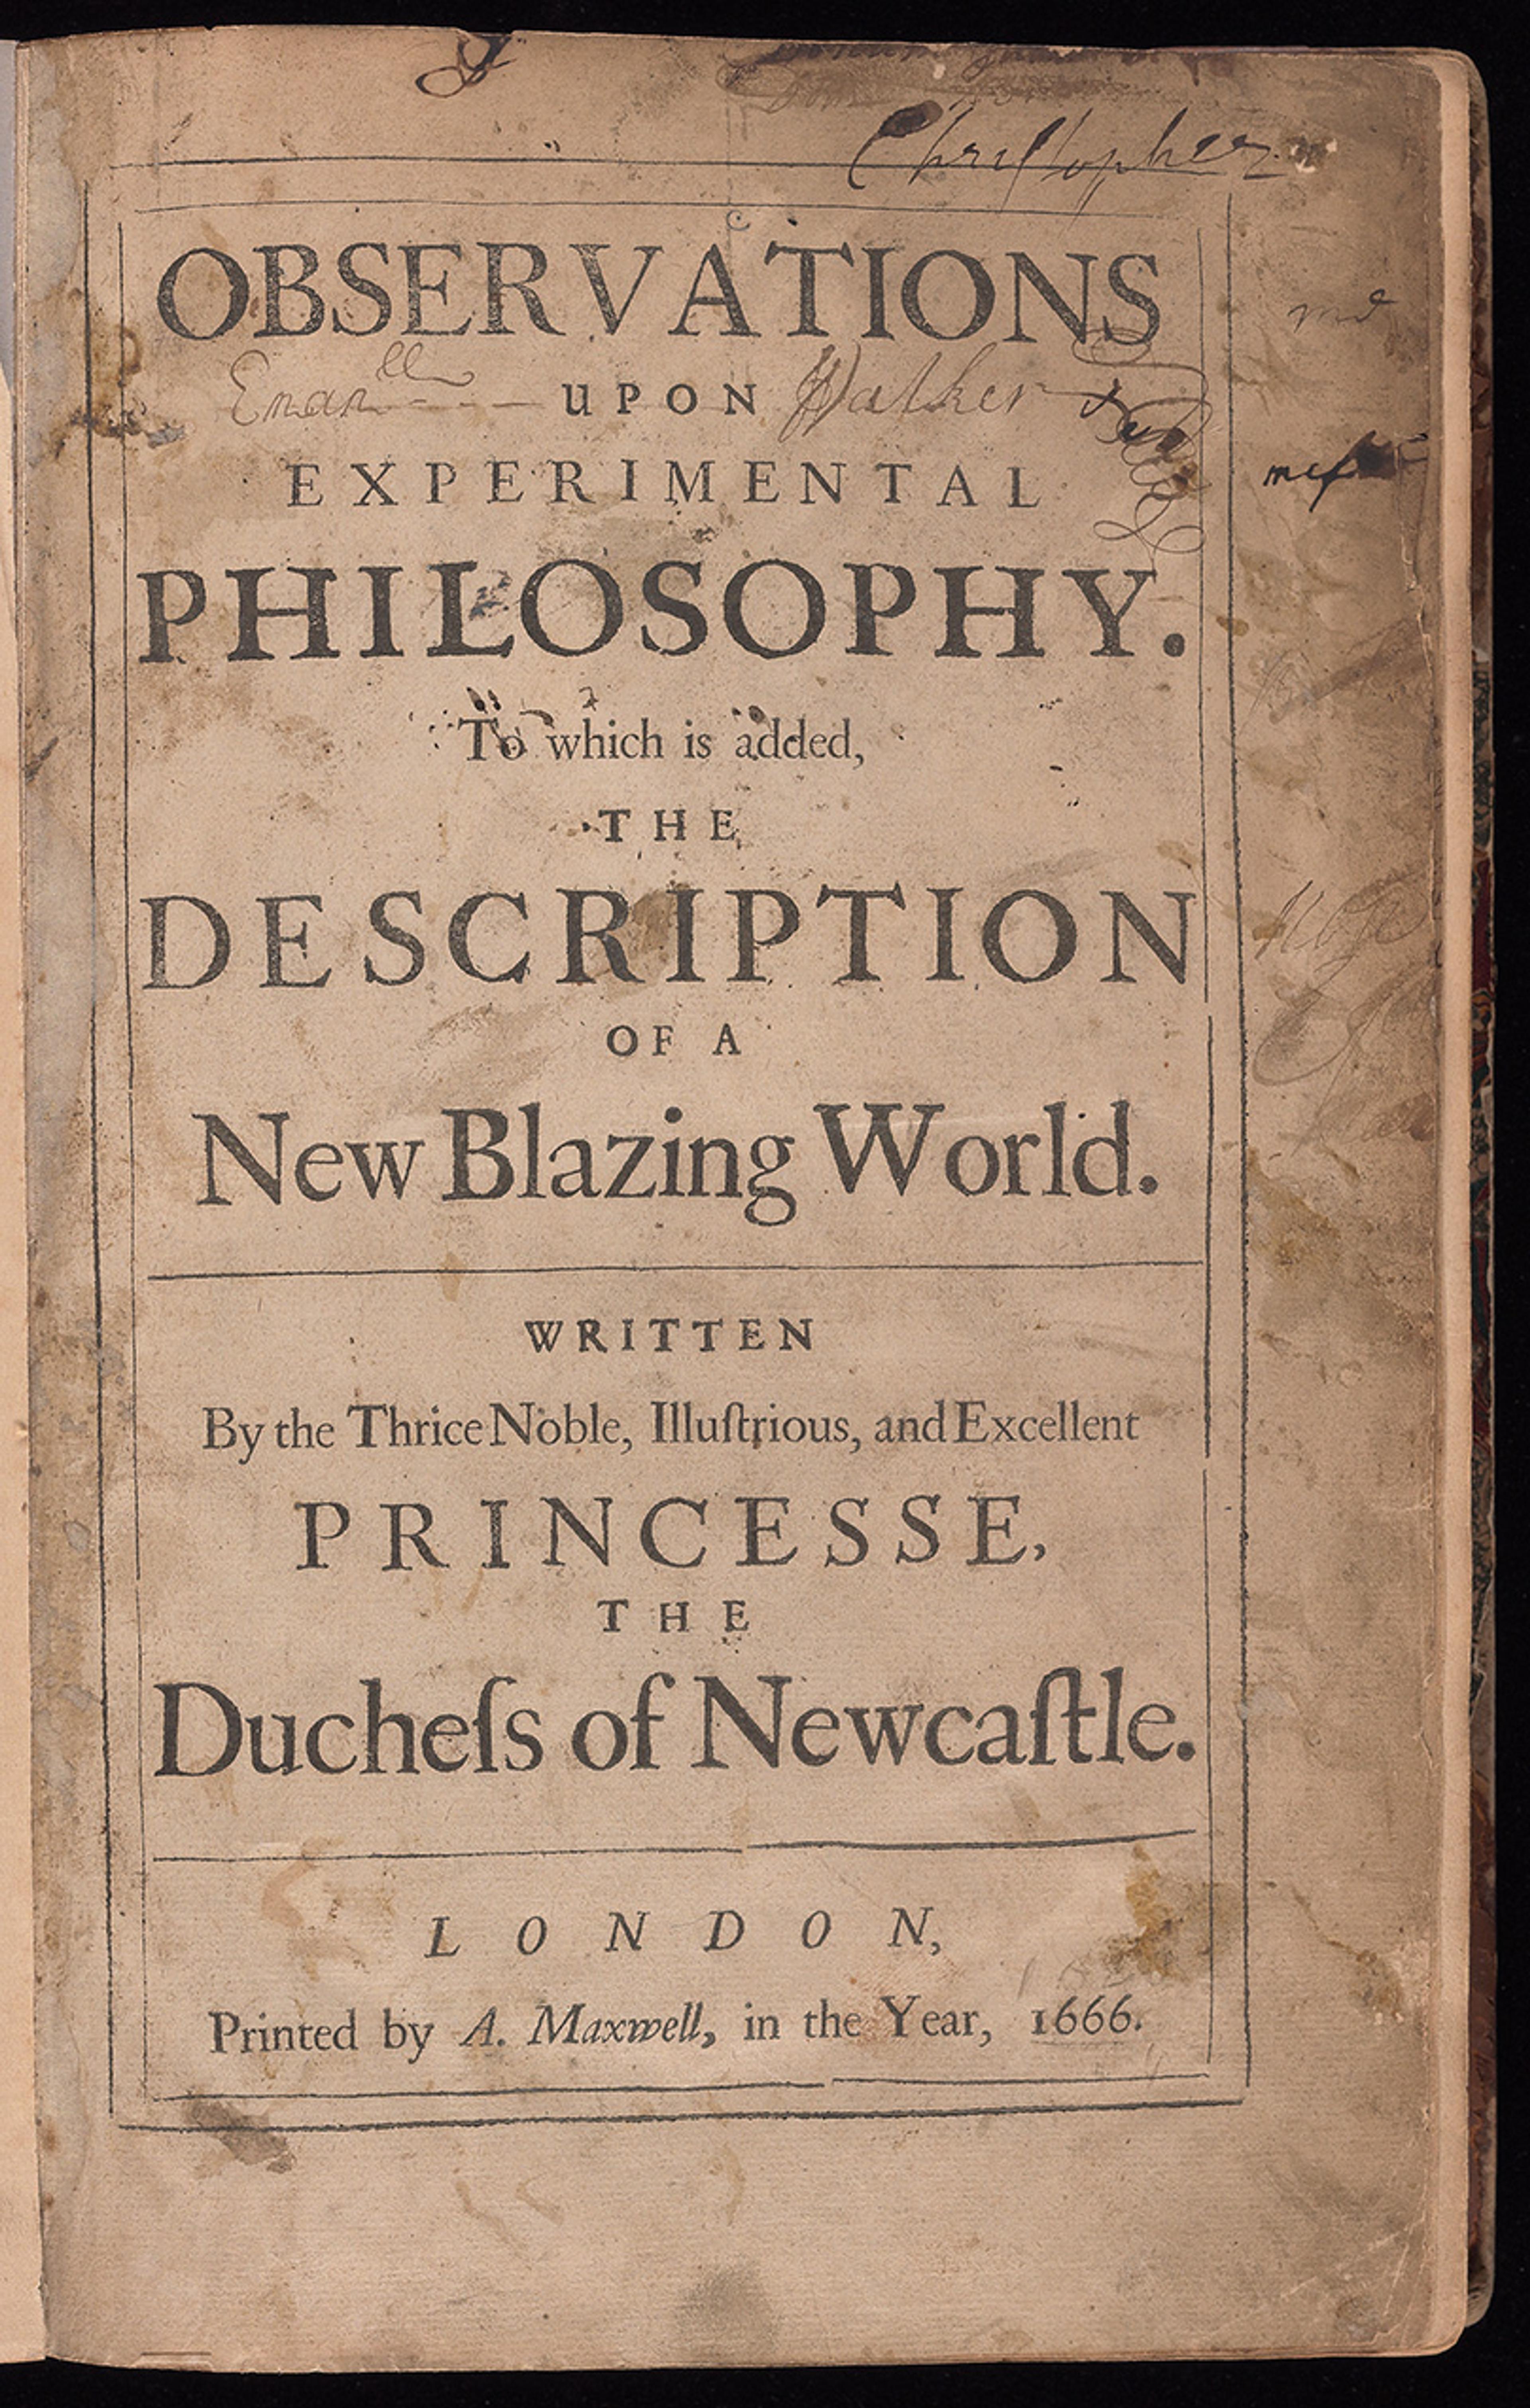 A 1666 title page of “Observations upon Experimental Philosophy” and “The Description of a New Blazing World,” written by the Duchess of Newcastle, printed in London by A. Maxwell, featuring handwritten annotations on the edges.